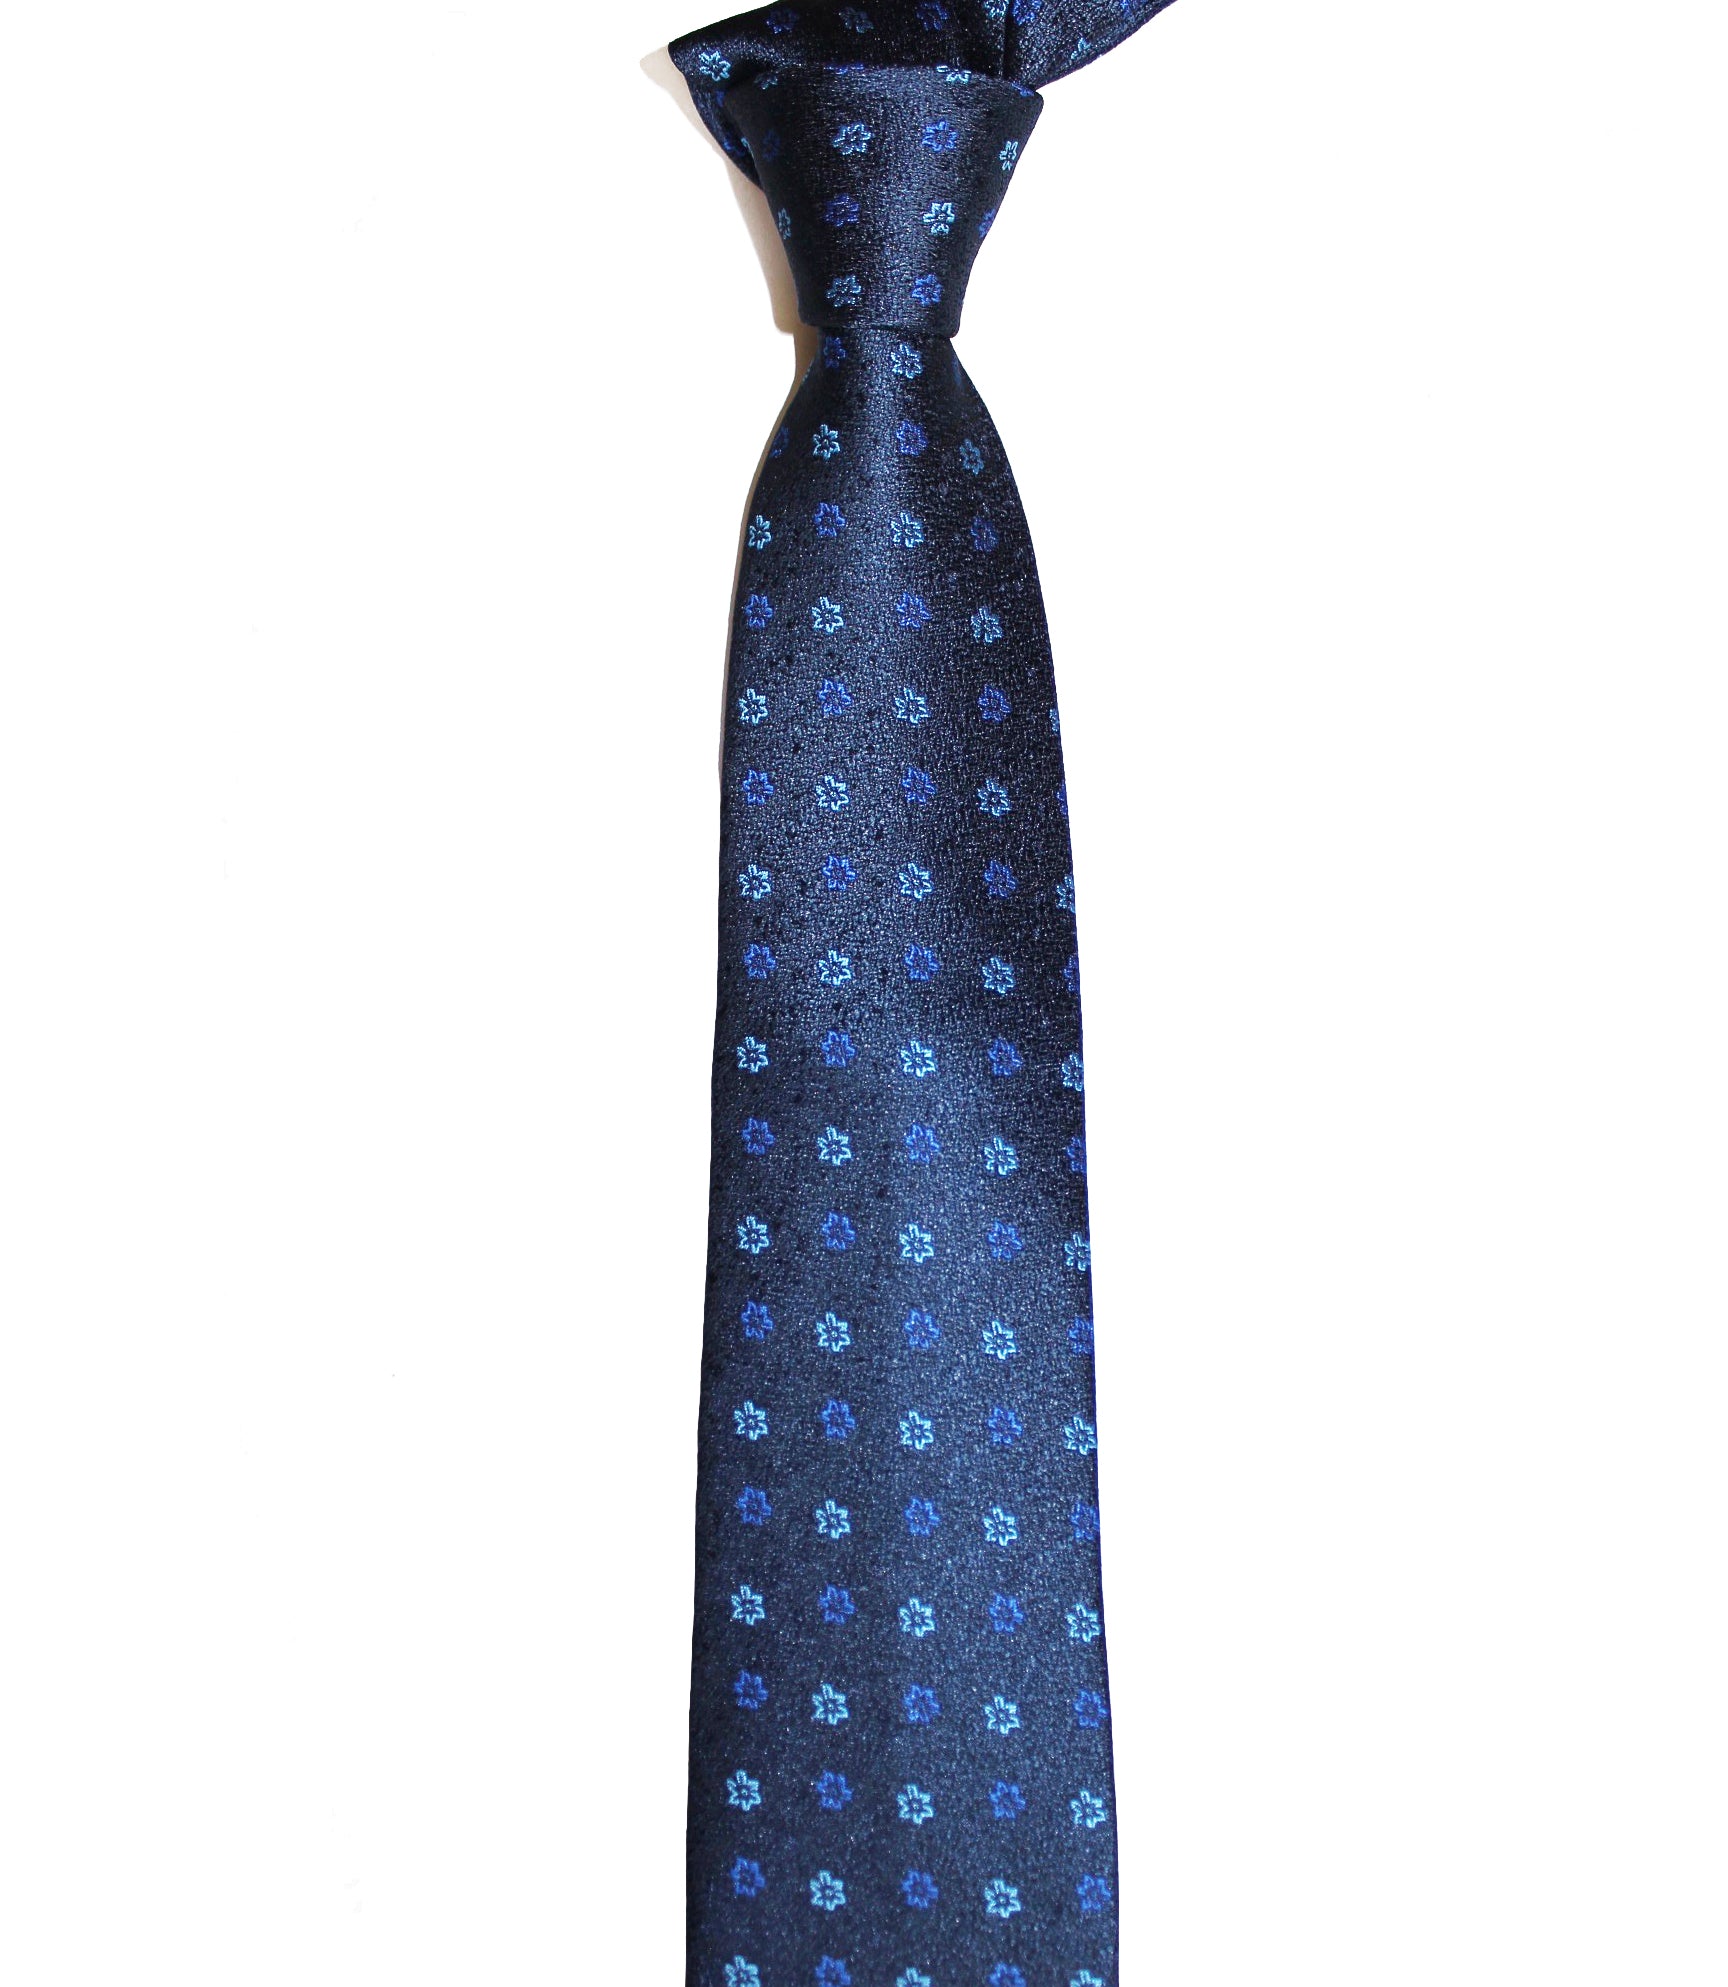 Ying Cai Norrian Tie /Blue 1